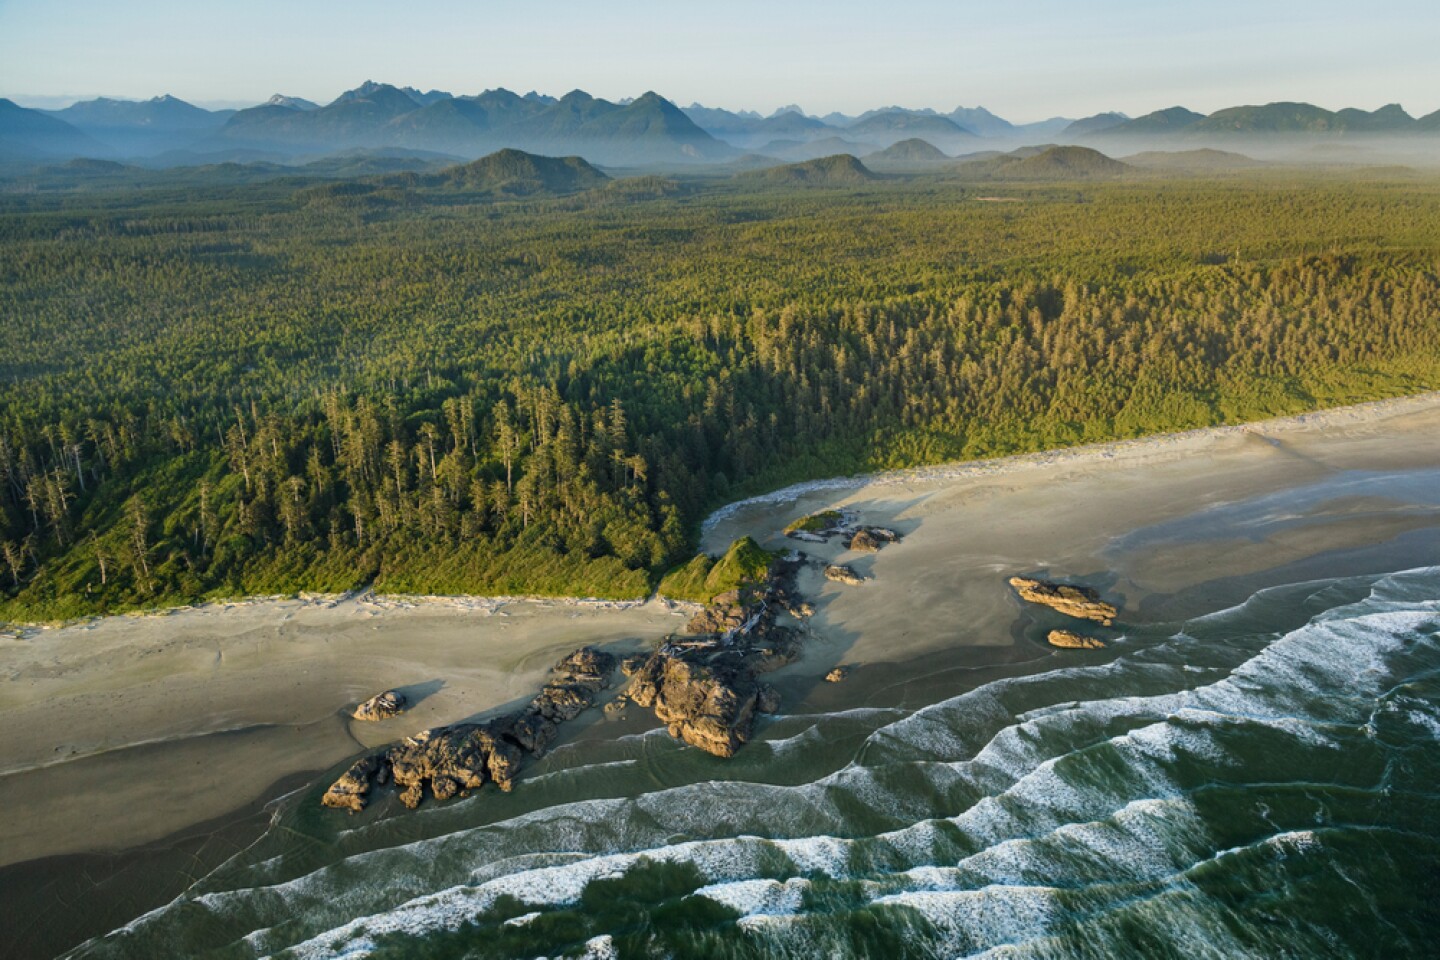 <h2>7. Pacific Rim National Park Reserve</h2> <p><i>British Columbia</i></p> <p><a class="Link" href="https://www.pc.gc.ca/en/pn-np/bc/pacificrim" rel="noopener">Pacific Rim National Park Reserve</a>’s 197 square miles of temperate rain forest showcase the magic that happens when you combine the grandeur of the Pacific Coast with the lowland forests of Vancouver Island. Here, sand dunes and towering trees such as sitka spruce keep Pacific winds from bulldozing the interior, supporting an ever-so-delicate ecosystem home to <a class="Link" href="https://www.pc.gc.ca/en/pn-np/bc/pacificrim/nature/especes-species" rel="noopener">threatened species</a> like the little brown bat and dromedary jumping-slug.</p> <p>The reserve is divided into three parts, and each carries its own unique appeal. Its northernmost section, called Long Beach, is a haven for <a class="Link" href="https://www.pc.gc.ca/en/pn-np/bc/pacificrim/activ/activ9" rel="noopener">surfers</a> year-round. For an experience on calmer waters, head southeast to the Broken Group islands, where kayaks and campers can hop among more than 100 islands, islets, and outcrops. Experienced hikers can take a week traversing the West Coast Trail. This hike travels over more than 100 ladders through its 47 miles as you navigate the coastal cliffs along the Pacific.</p> <h3>How to get to Pacific Rim National Park Reserve</h3> <p>The western side of Vancouver Island is remote, so your best bet is to drive your car to either Nanaimo or Victoria’s ports. If you’re coming from Victoria, drive north along Highway 1 to reach Highway 19 (around Nanaimo). Keep going north for 30 miles until you get to Highway 4, which will take you to the Long Beach section of the park.</p>